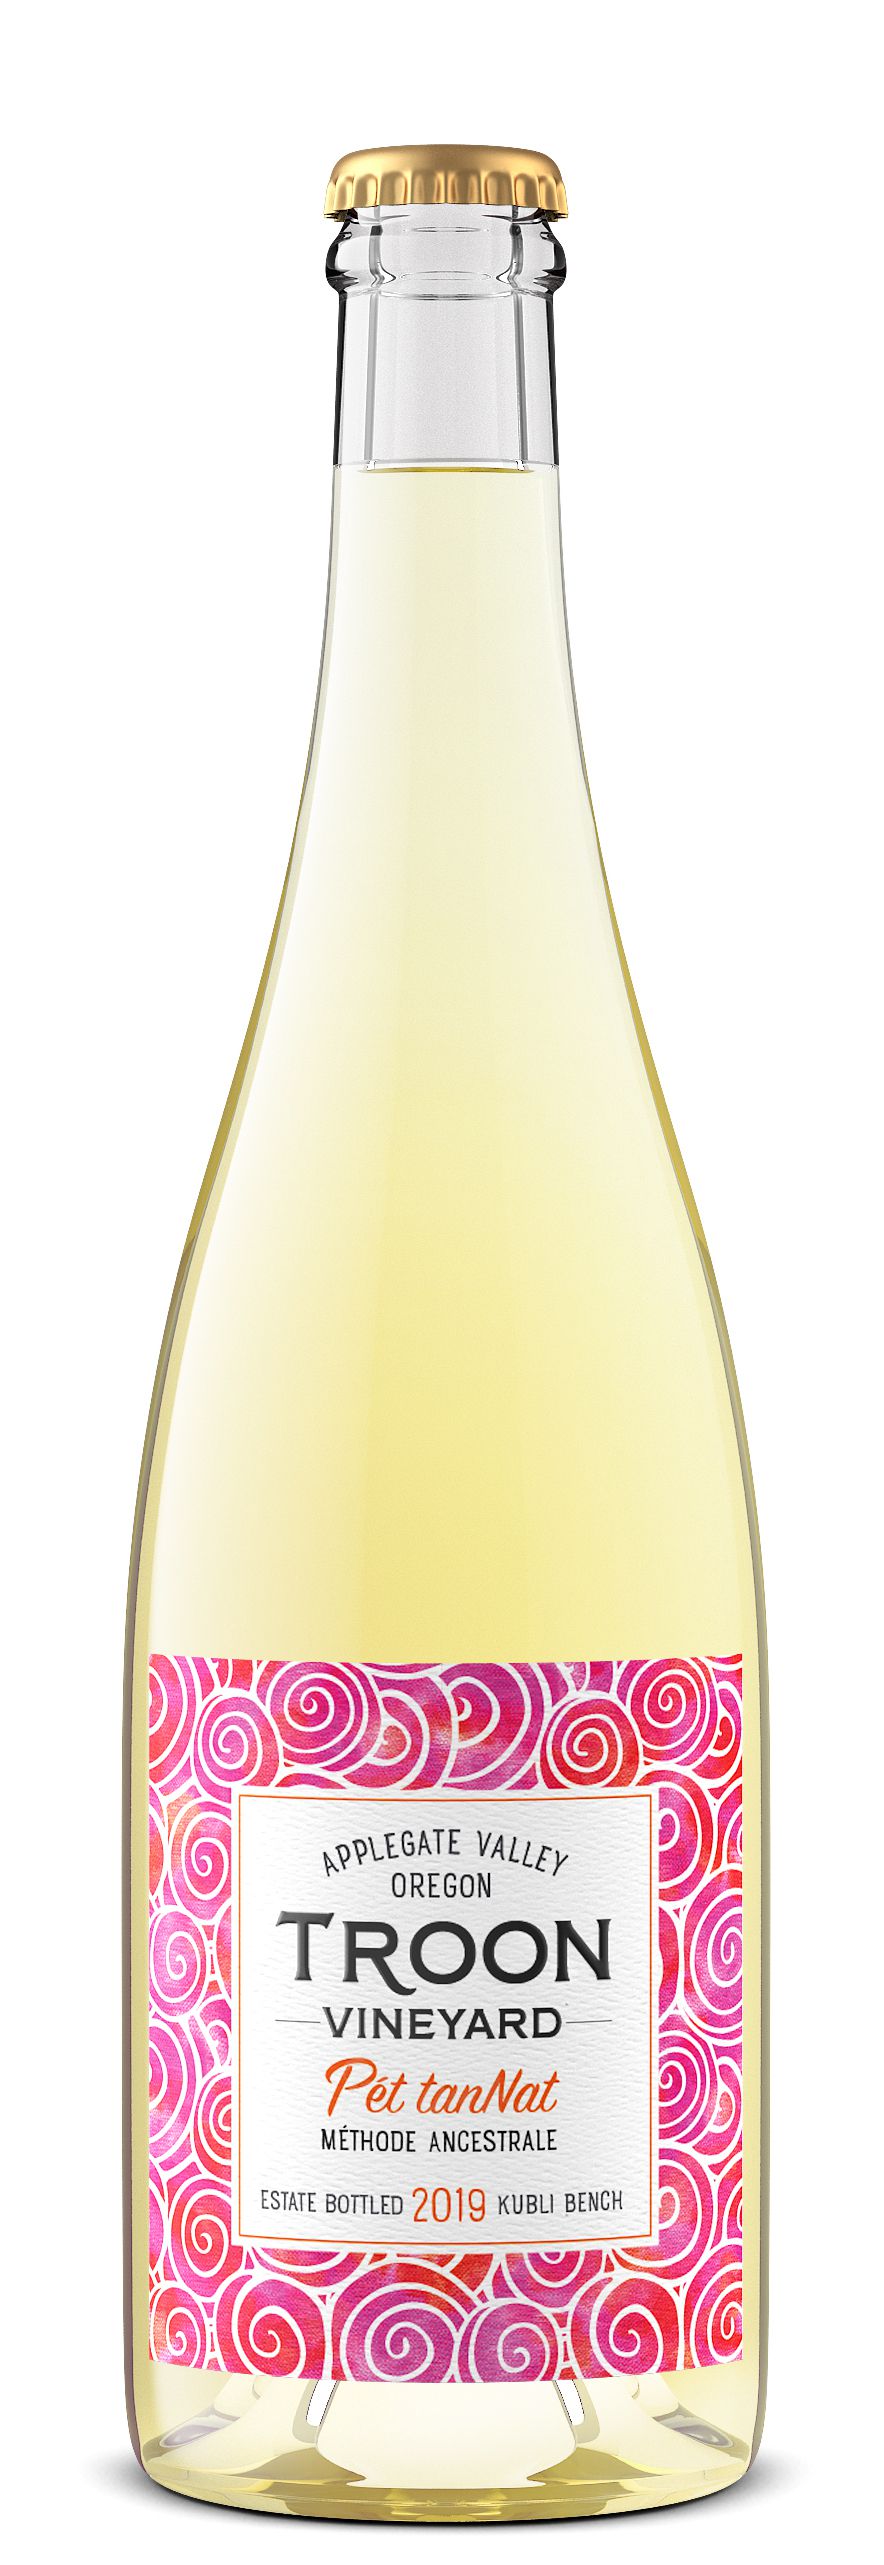 A bottle of white-gold bubbles with a pink label